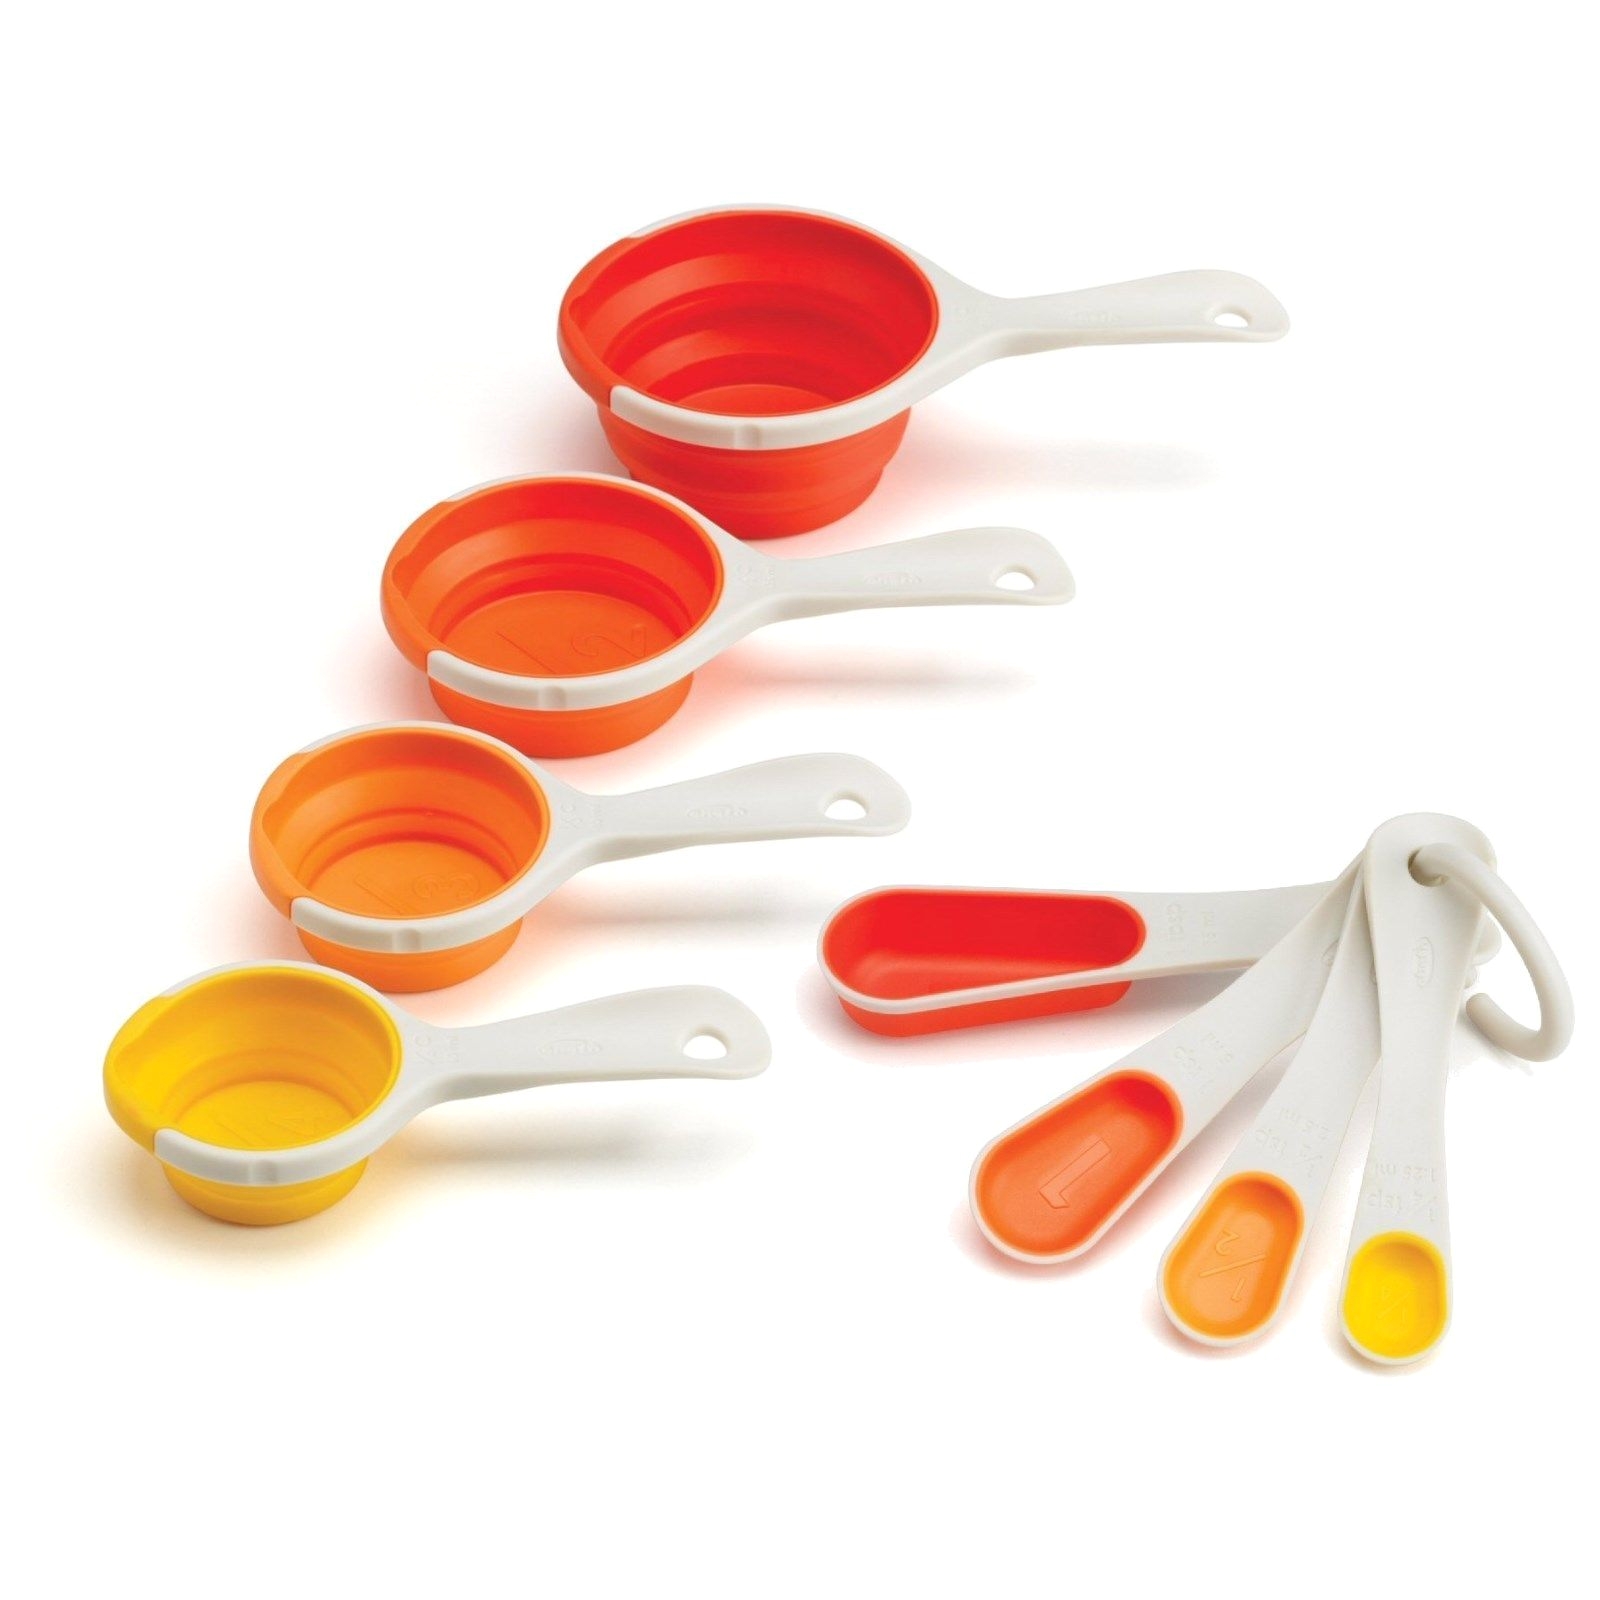 chef n sleekstor 8pc pinch pour collapsible measuring cup nesting spoon set